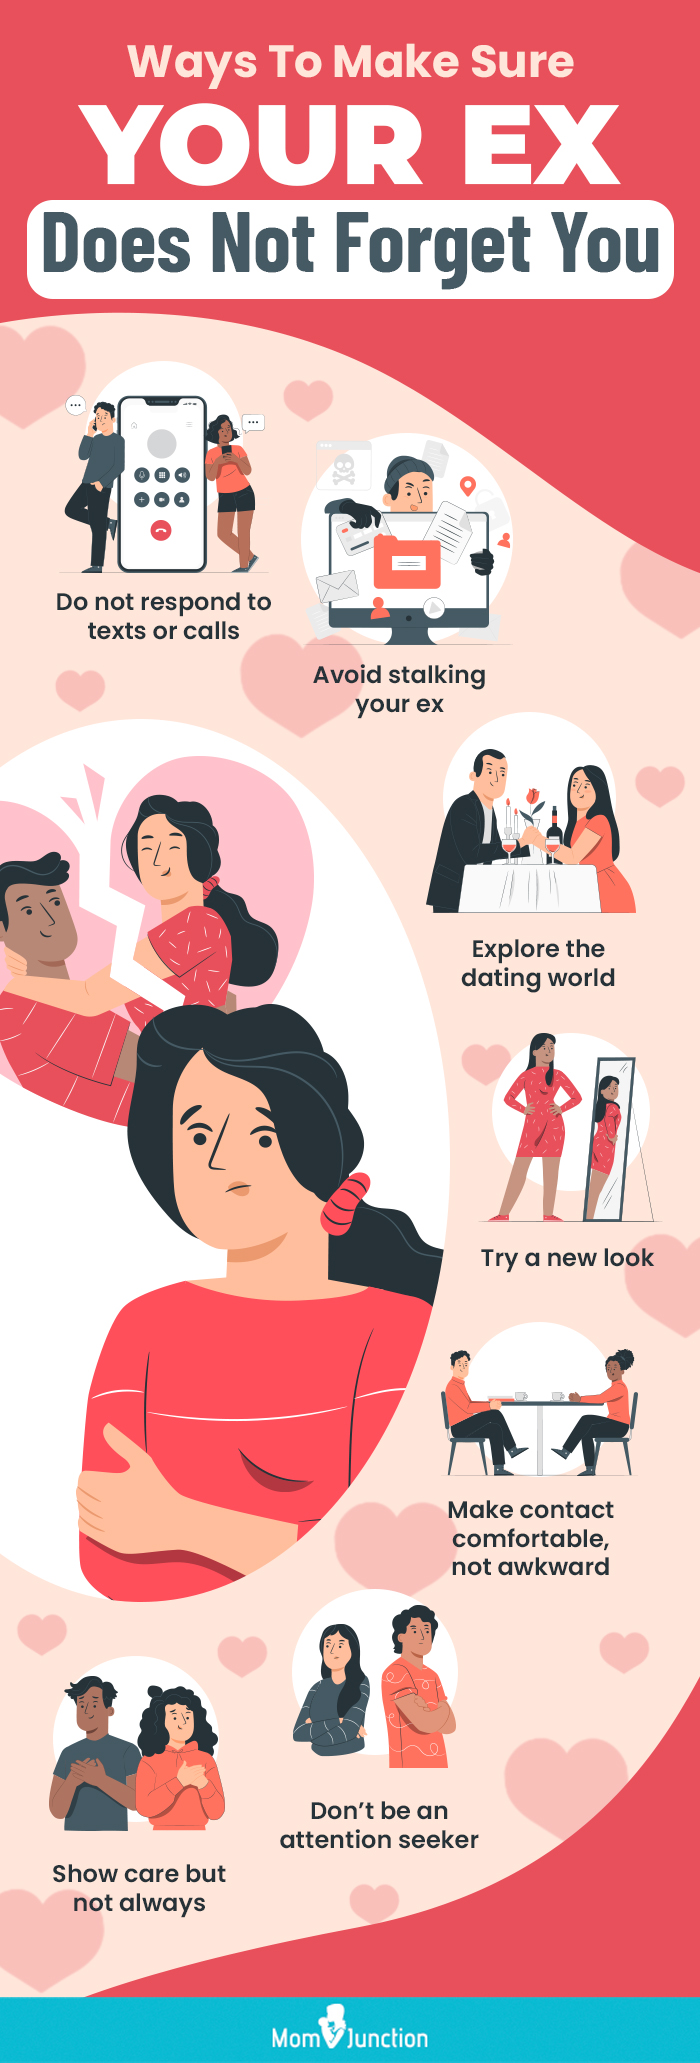 ways to make sure your ex does not forget you (infographic)